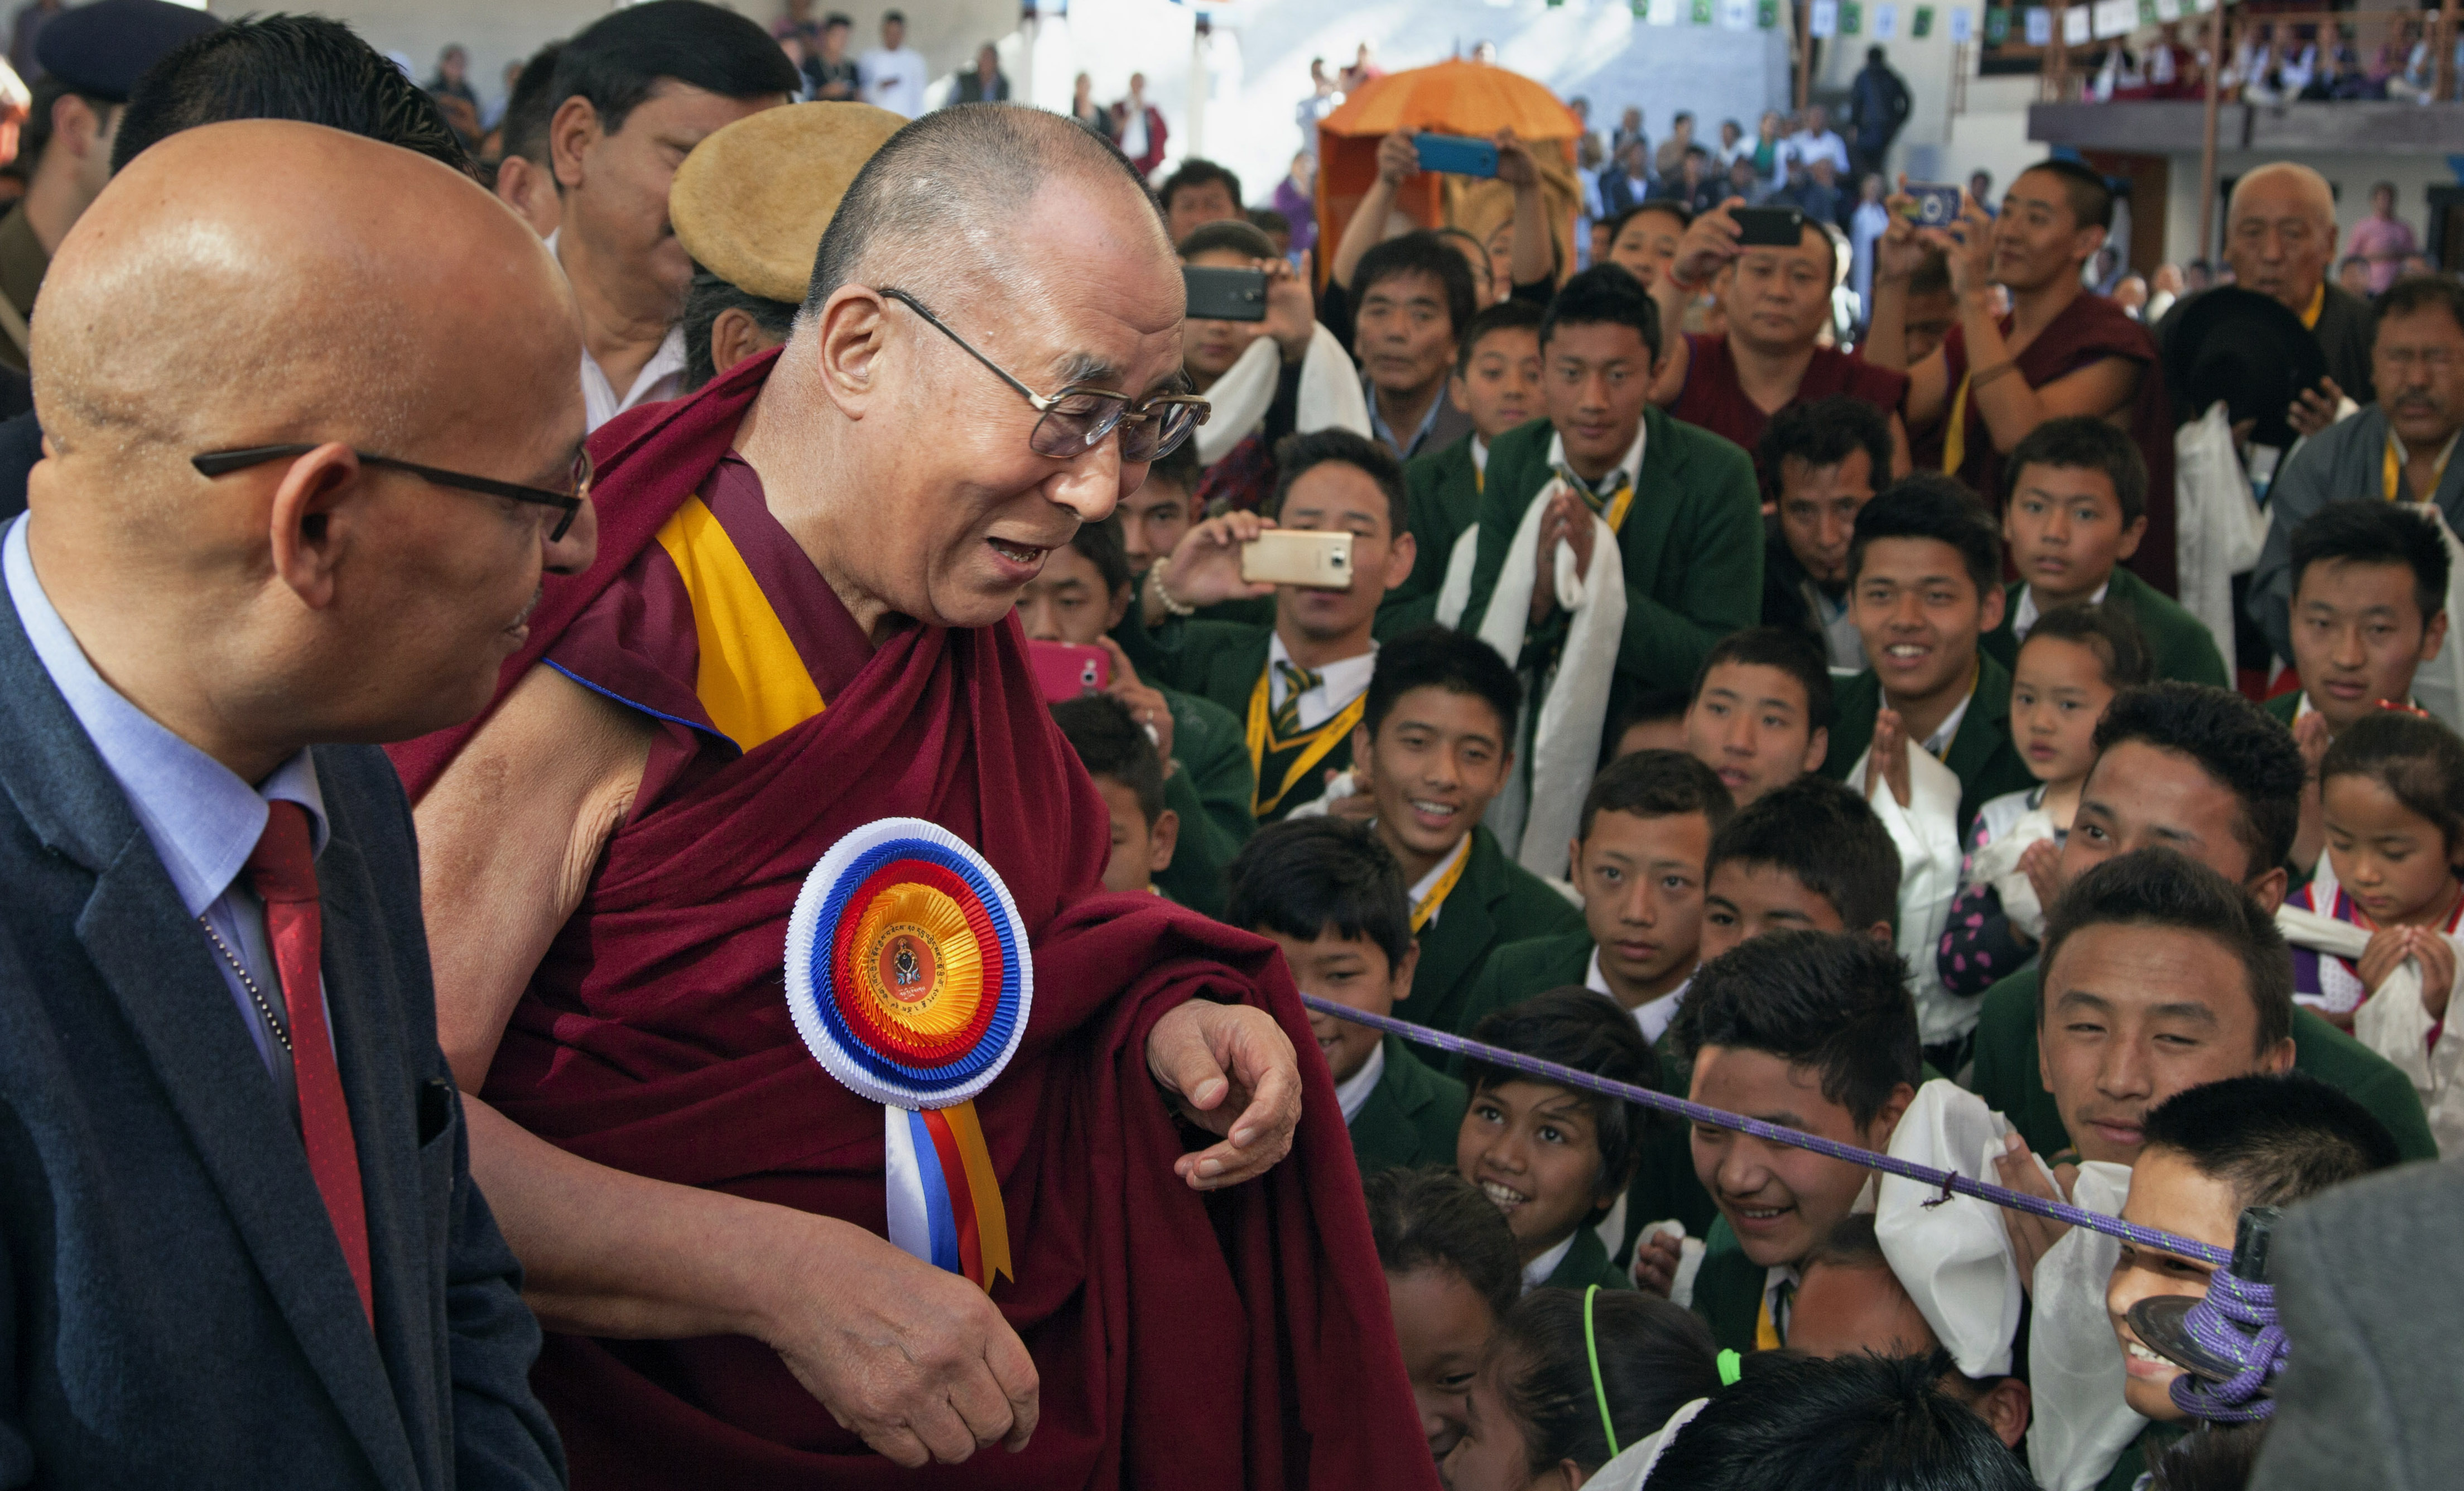 The Dalai Lama is welcomed by schoolchildren upon his arrival at the Tibetan Institute of Performing Arts in Dharmsala, India. Photo: AP